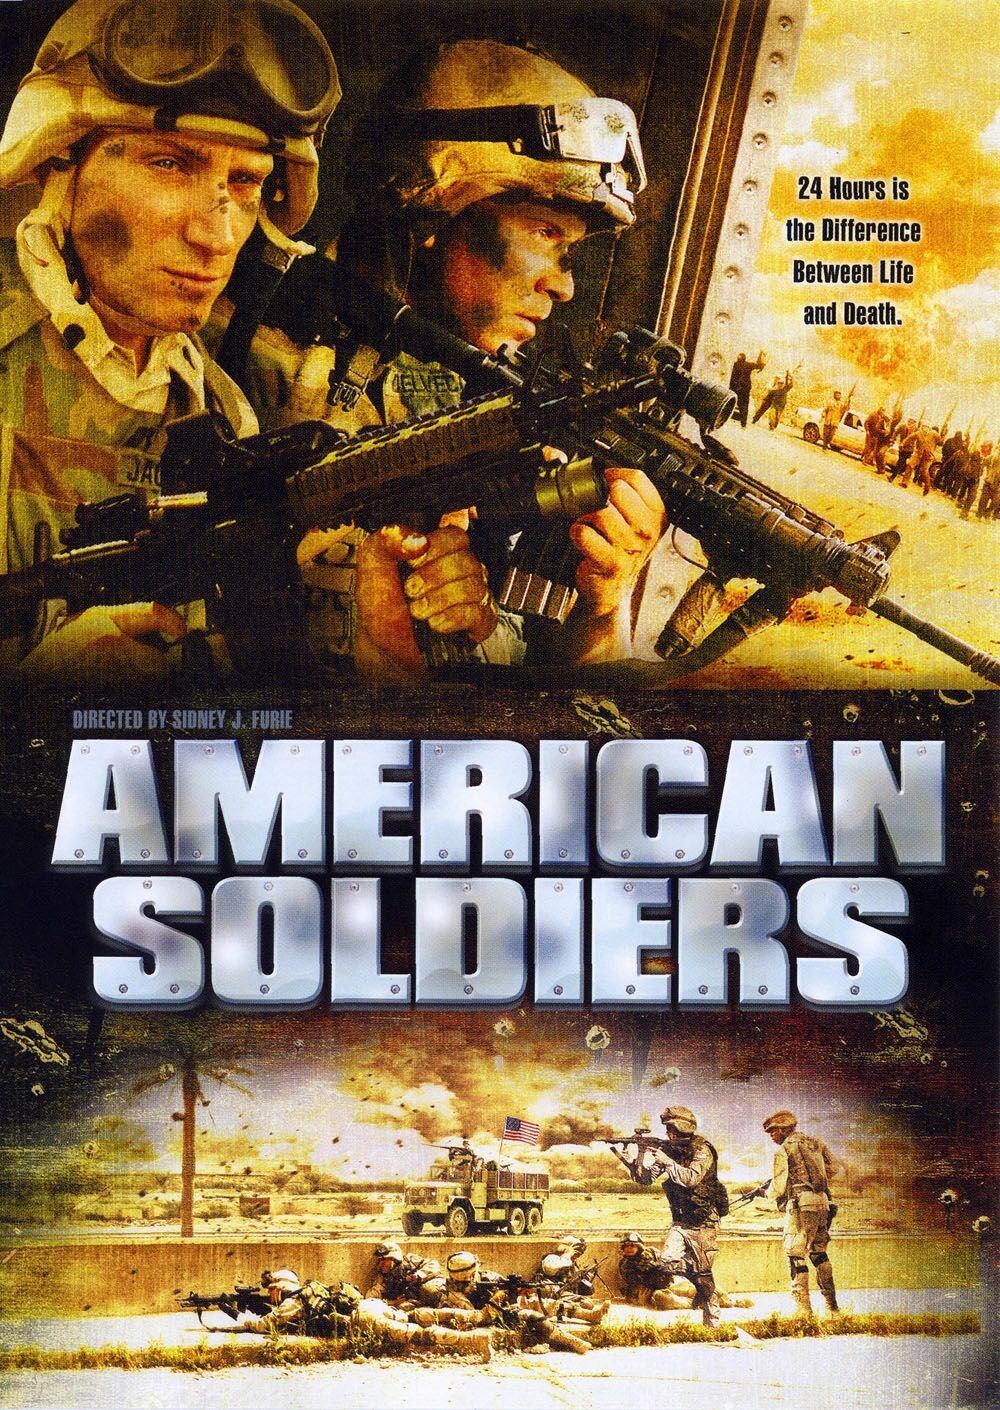 Poster of the movie American Soldiers